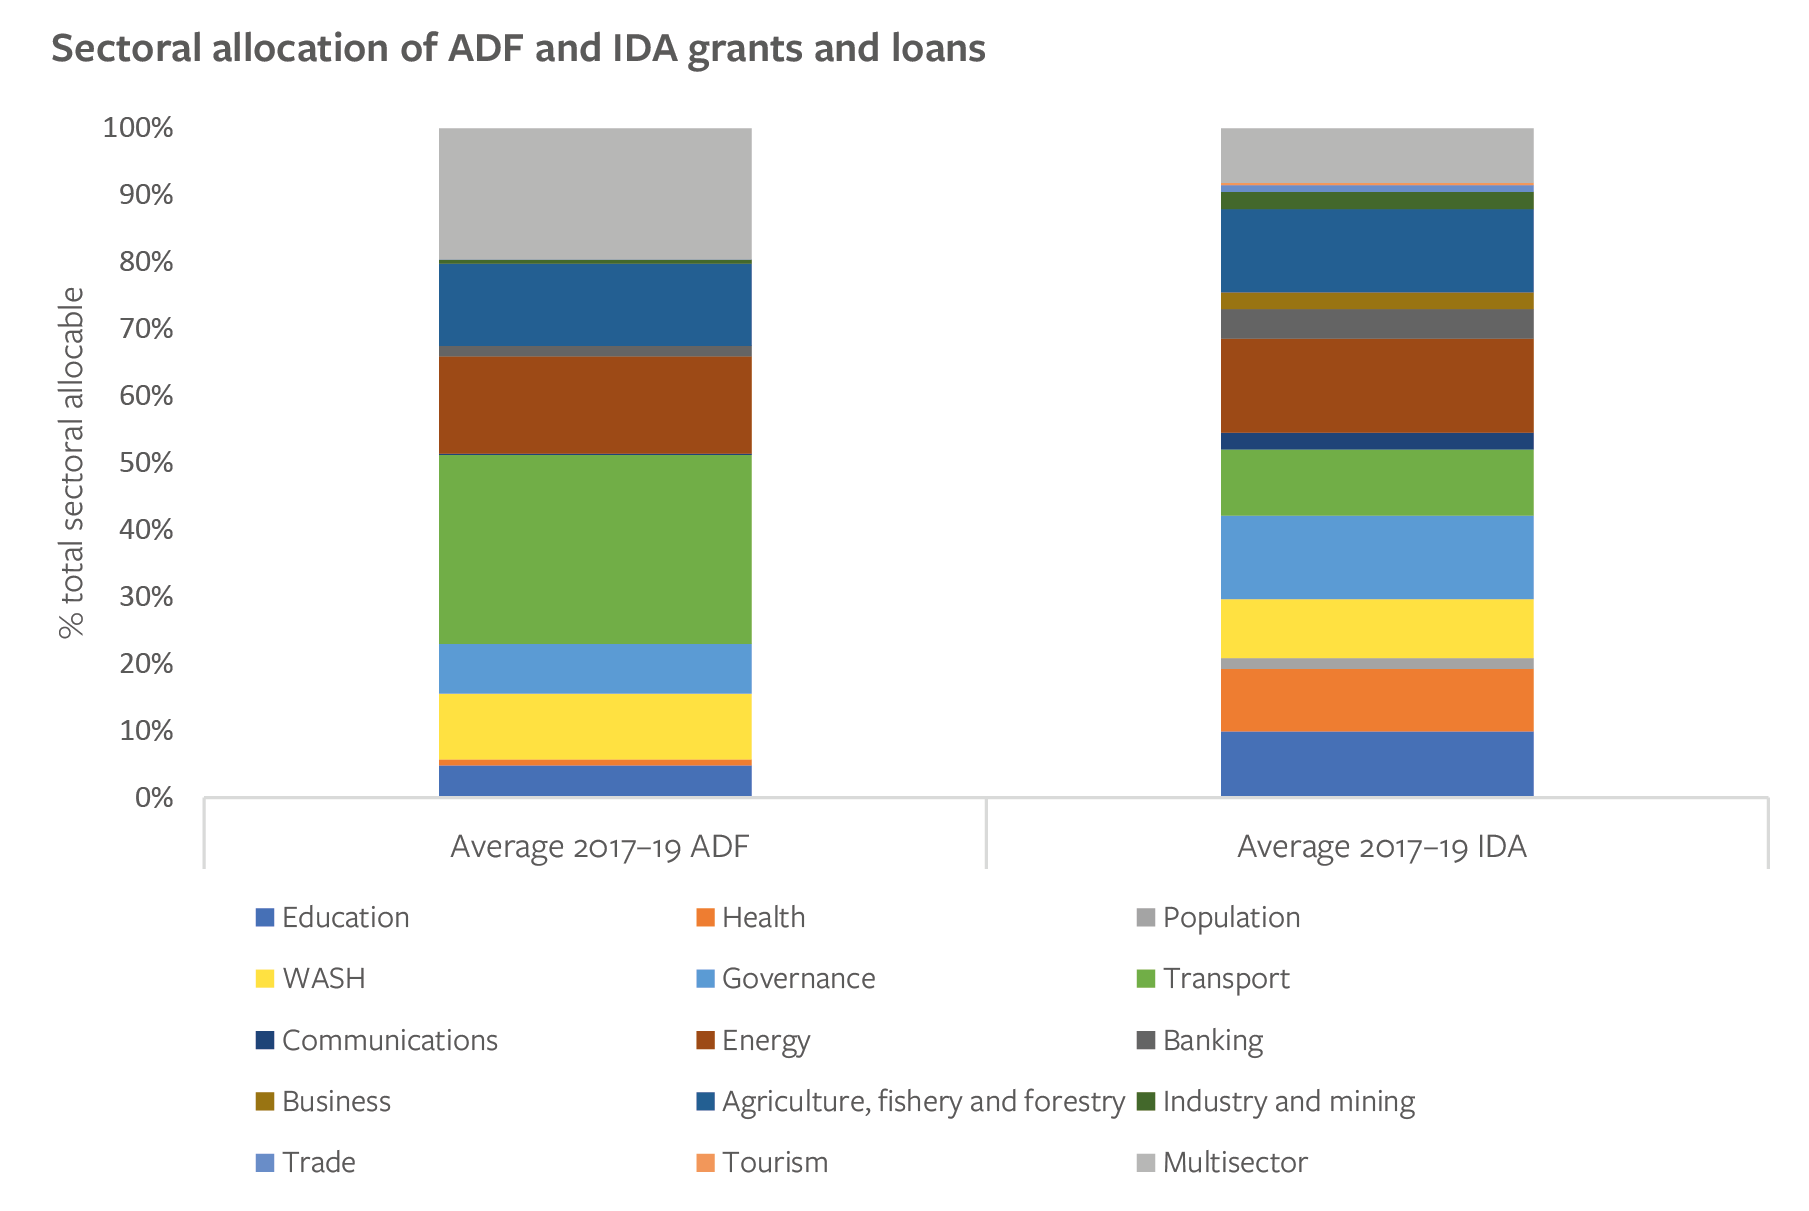 Figure 3: Sectoral allocation of ADF and IDA grants and loans